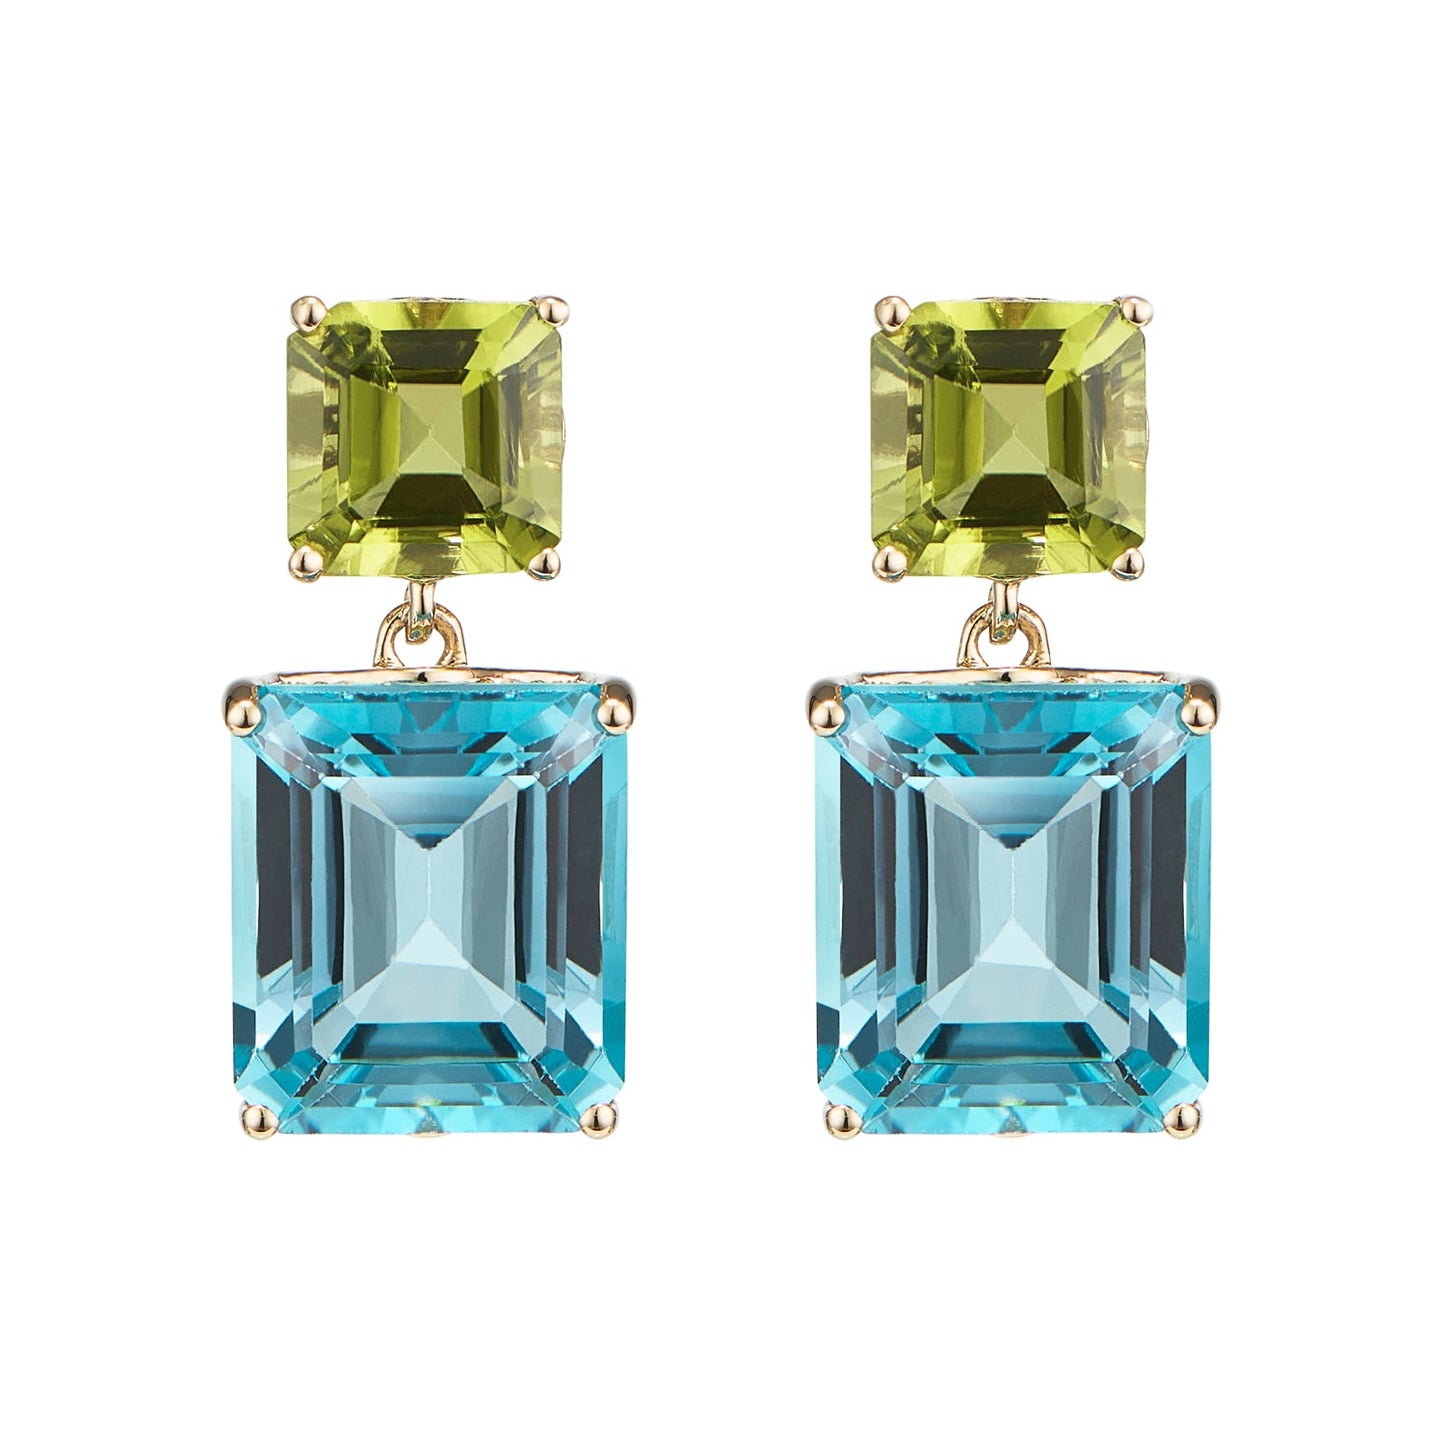 Load image into Gallery viewer, London-made luxury custom gold gemstone jewellery -9ct Yellow Gold Octagon Gold Drop Earrings in Peridot and Blue Topaz – Andalusian Collection, Augustine Jewellery, British Jewellers, Gemstone Jewellery, Luxury Jewellery London.
